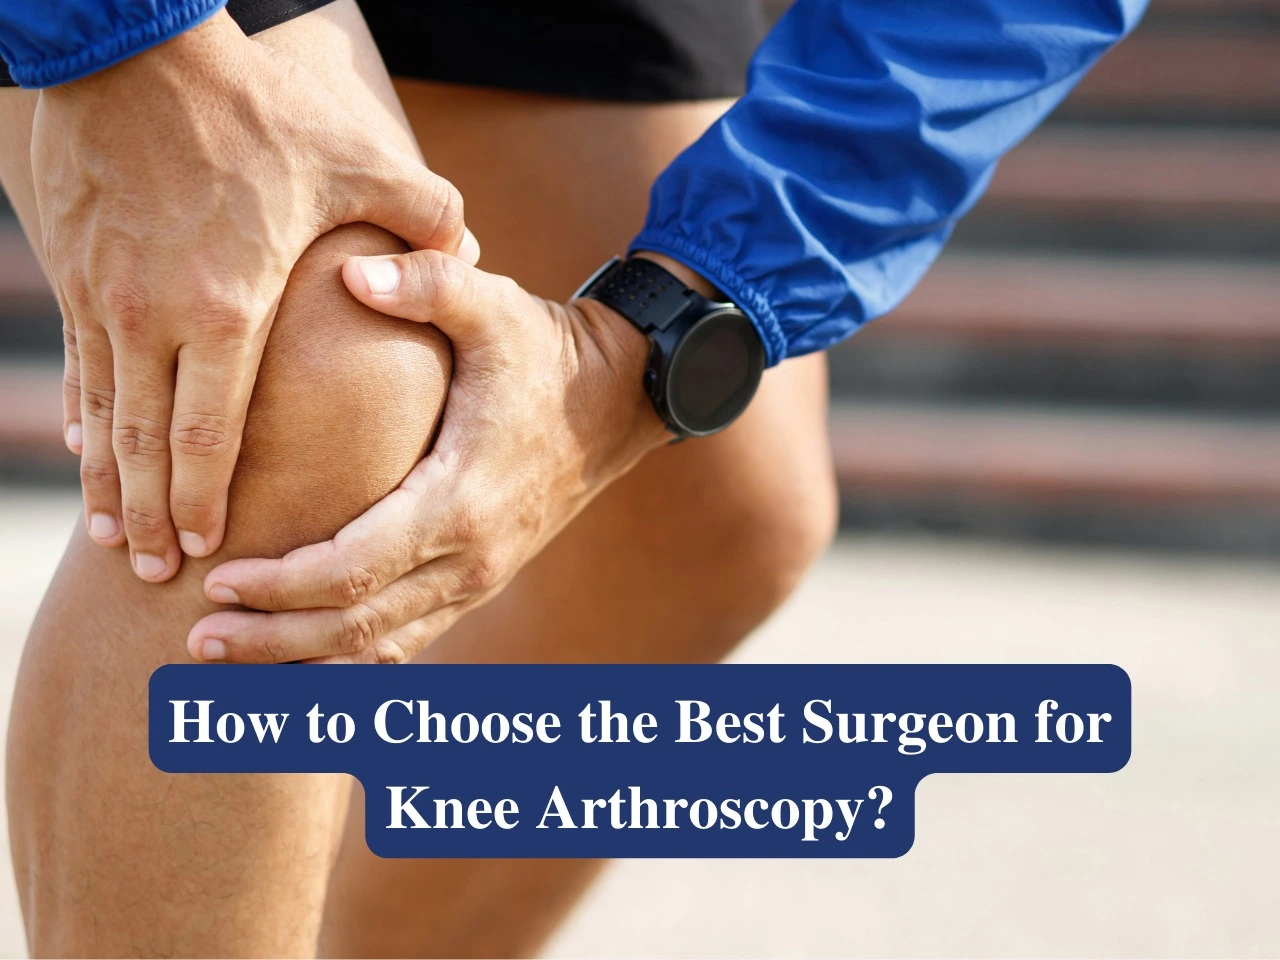 How to Choose the Best Surgeon for Knee Arthroscopy